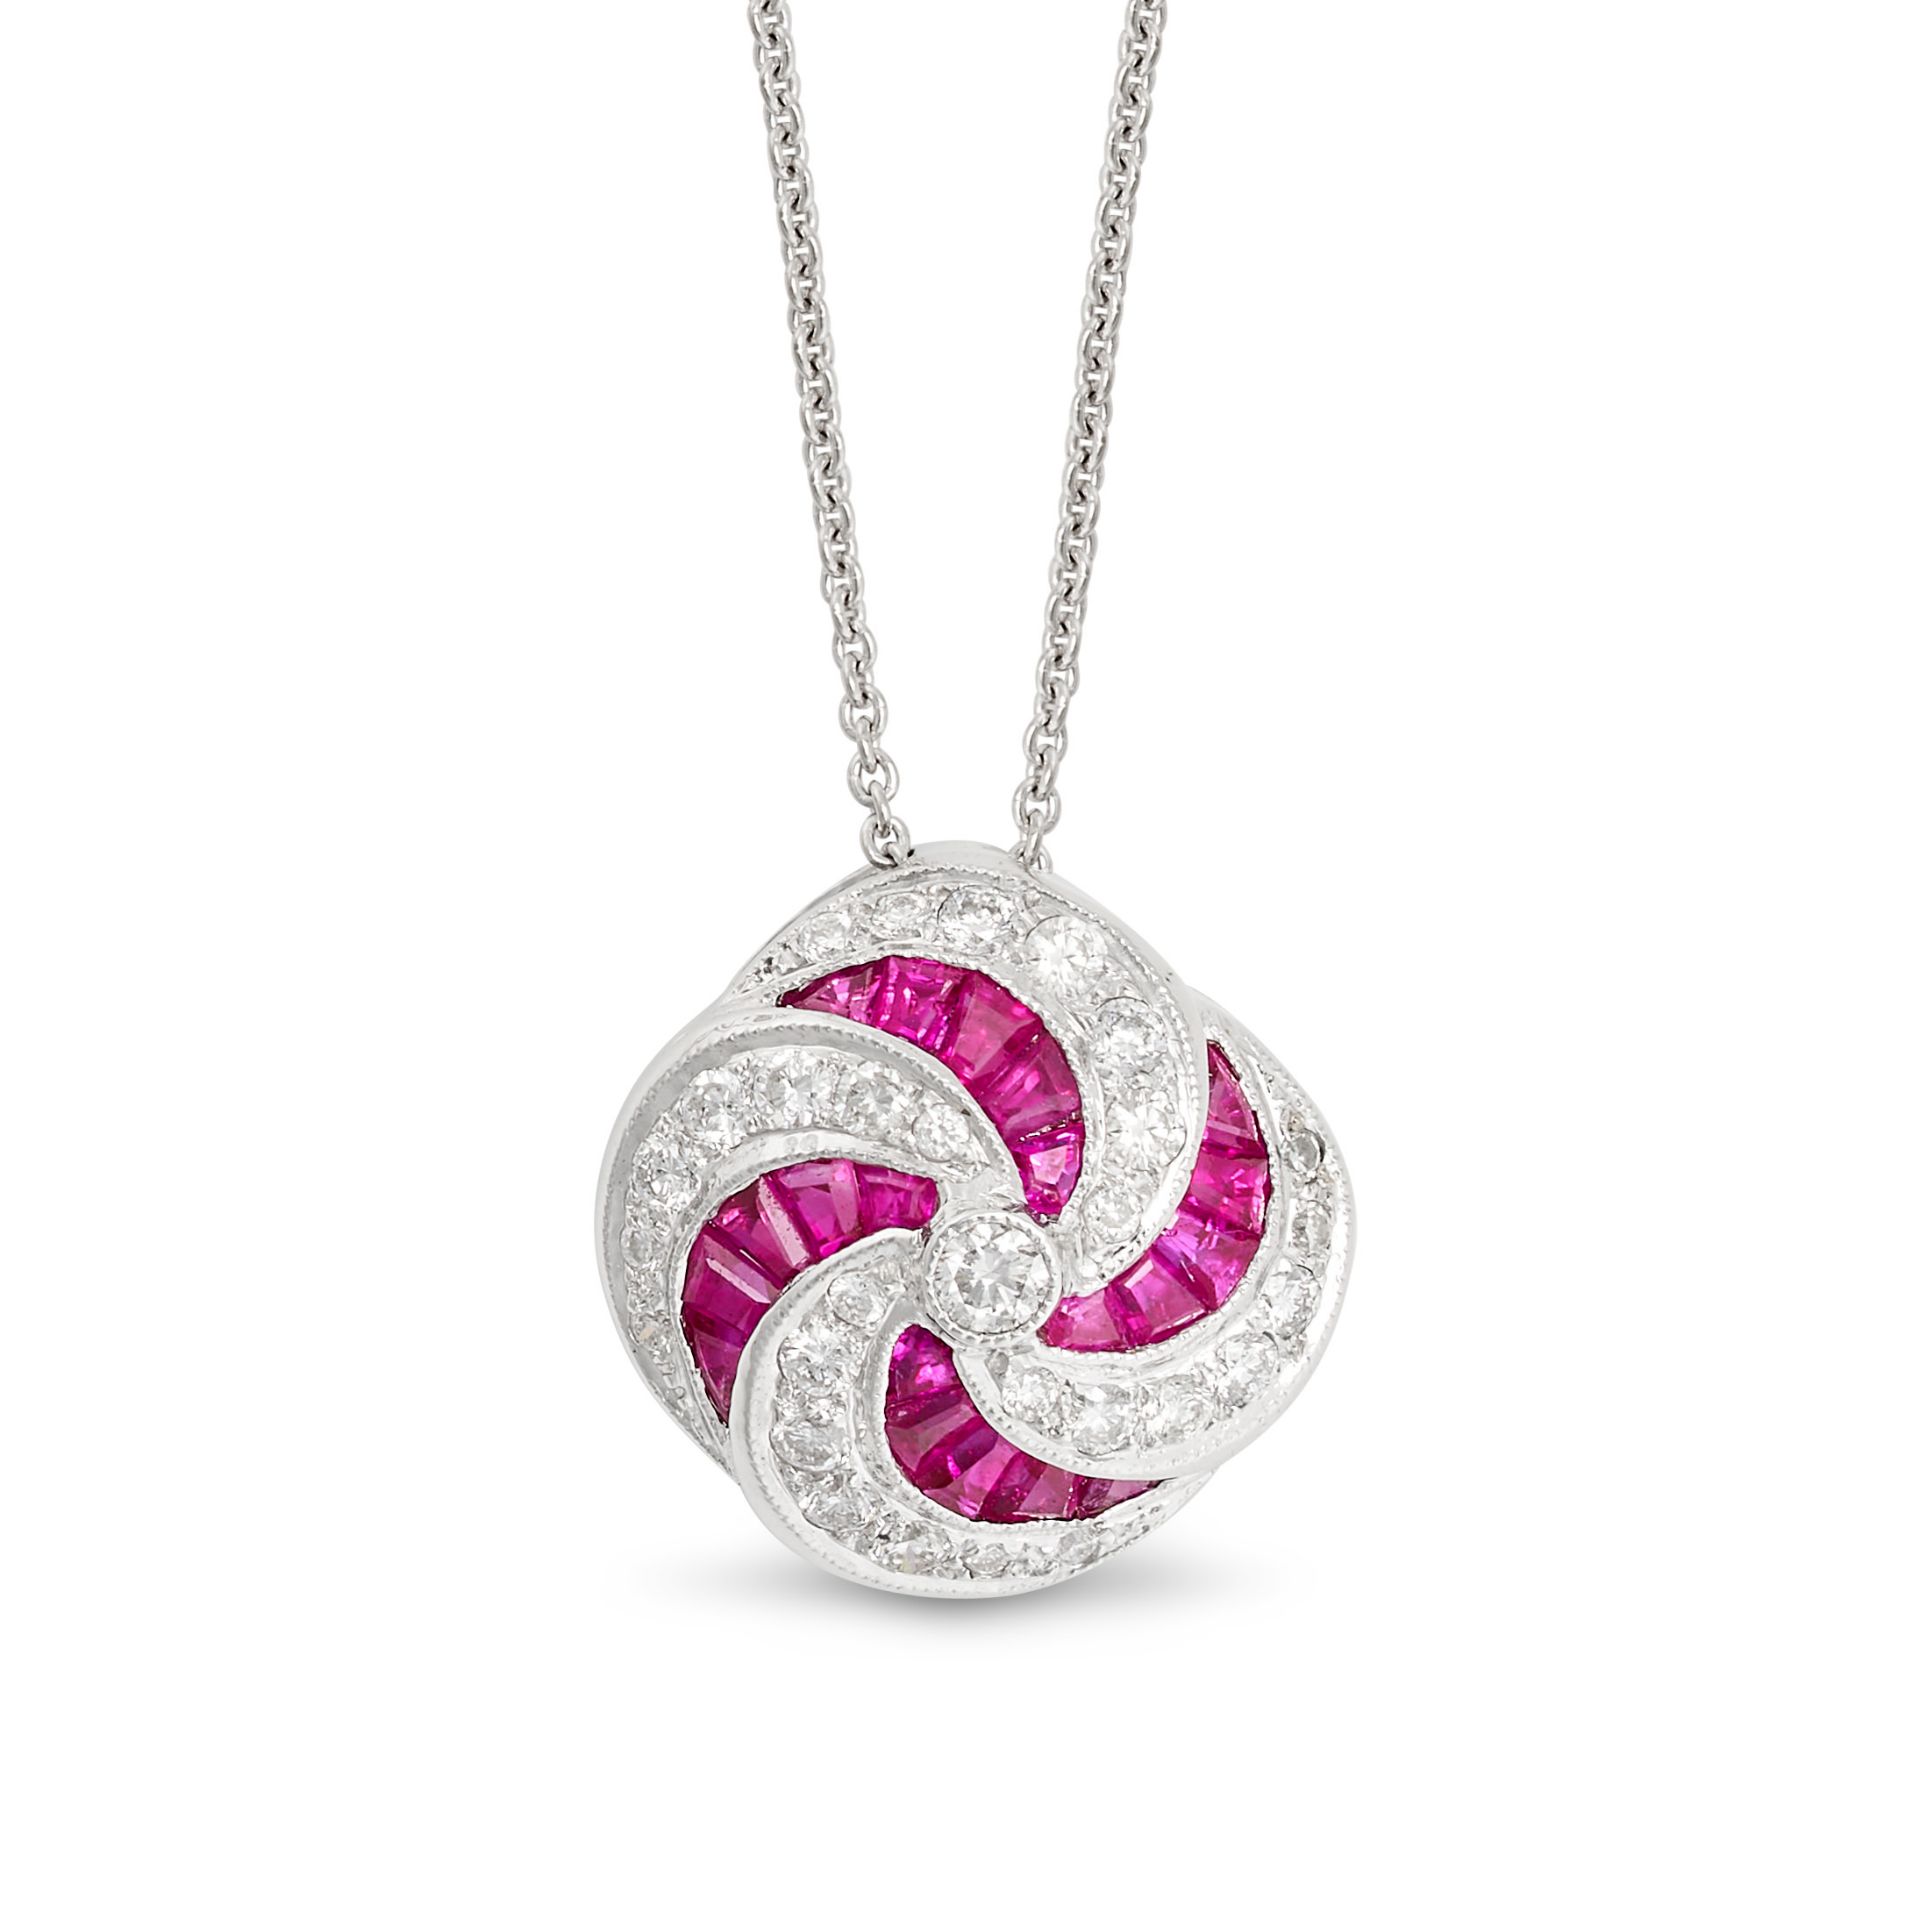 A RUBY AND DIAMOND PENDANT NECKLACE in 18ct white gold, the pendant in scrolling design, set with...